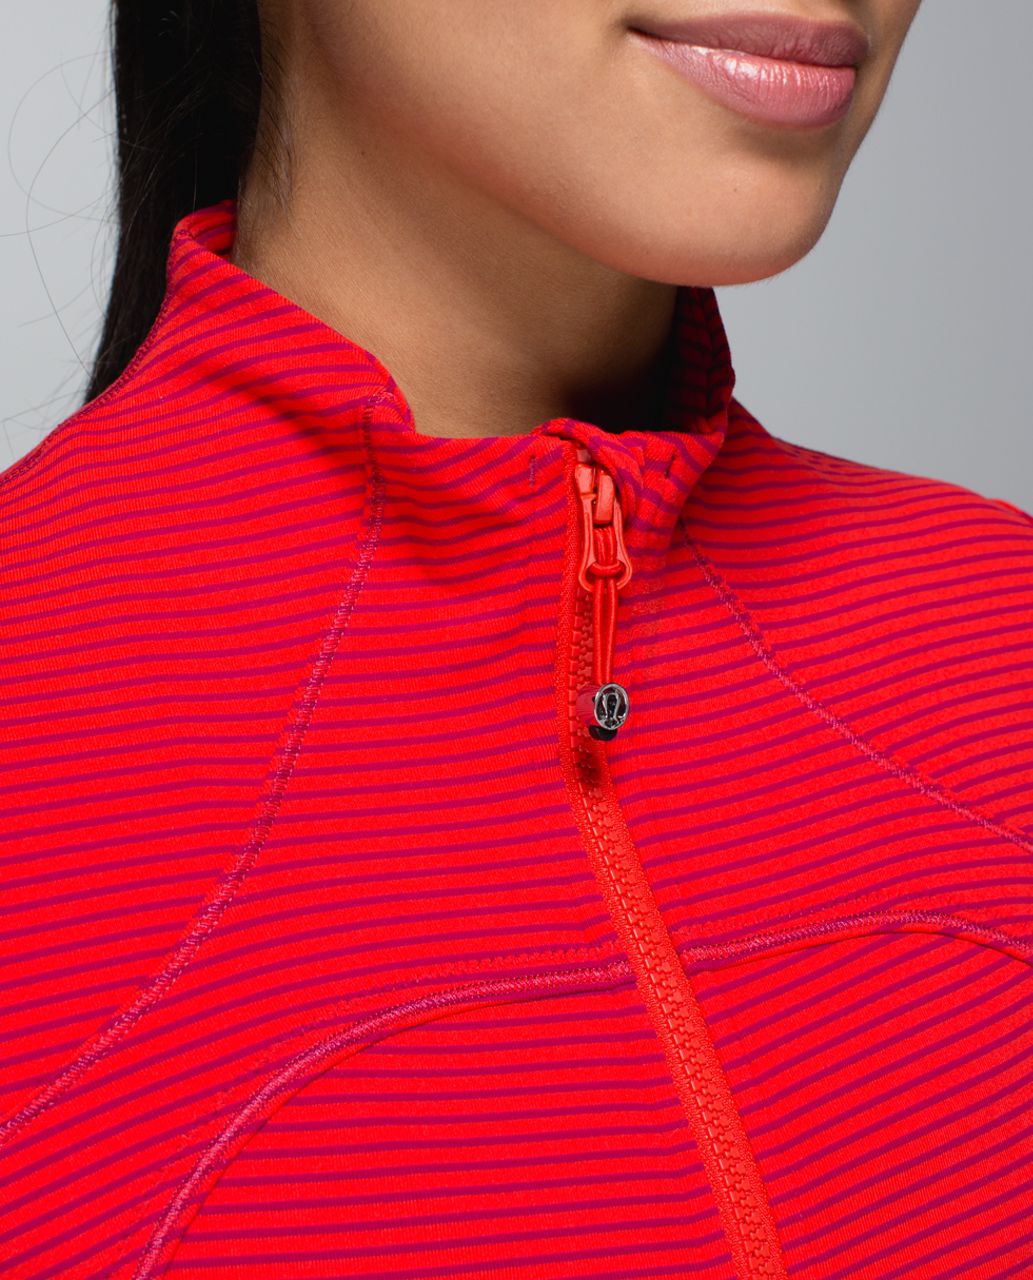 Lululemon Forme Jacket (Cuffins) - Hyper Stripe Bumble Berry Flaming Tomato